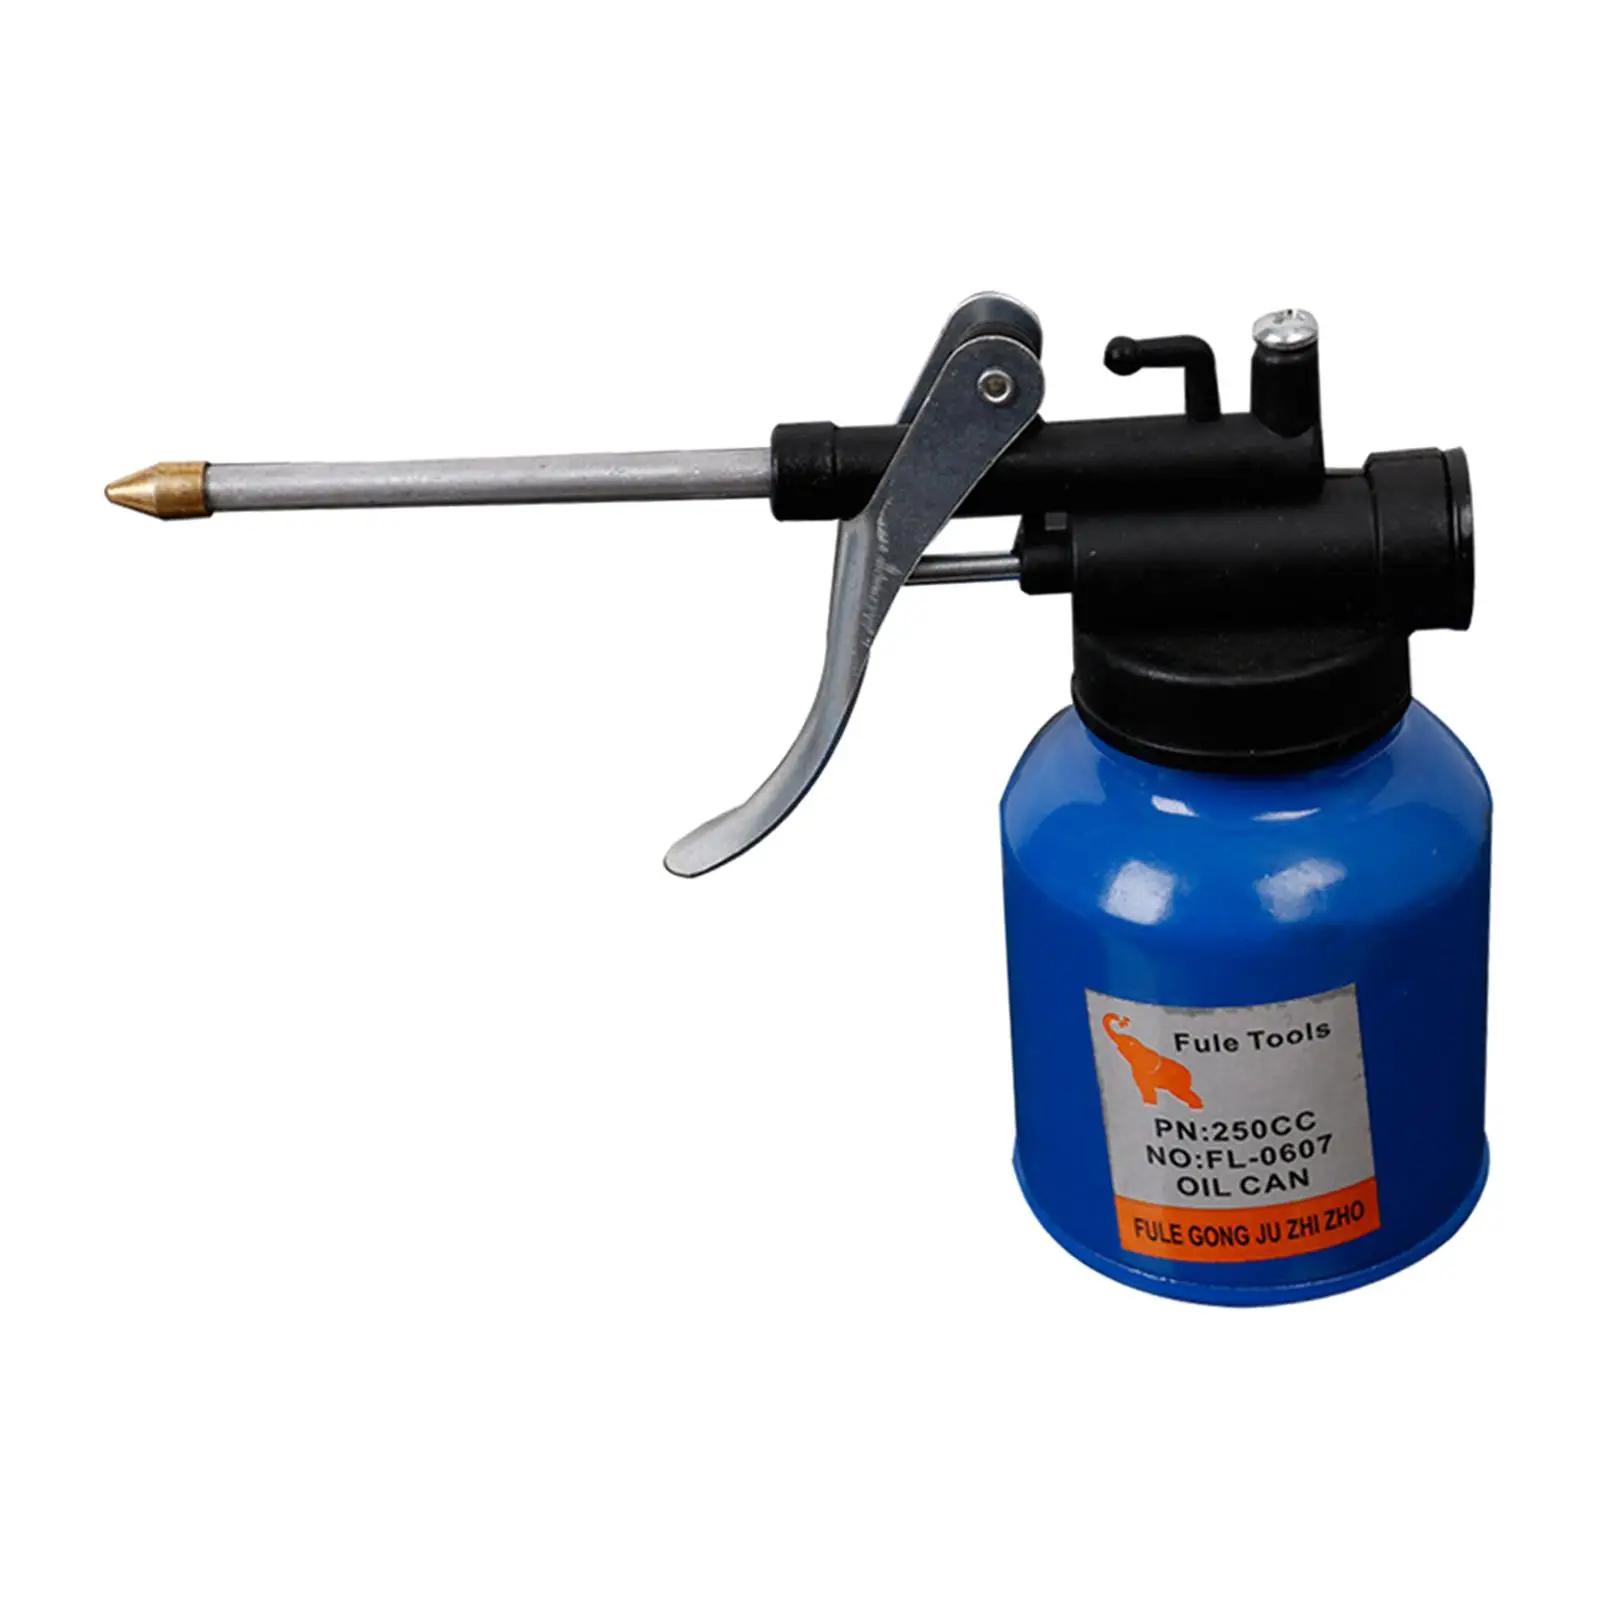 Oil Can Pump Oiler 250ml High Pressure Oiler Lubrication Oil Can Bottle for Liquid Handling Oiling Lubricants Grease